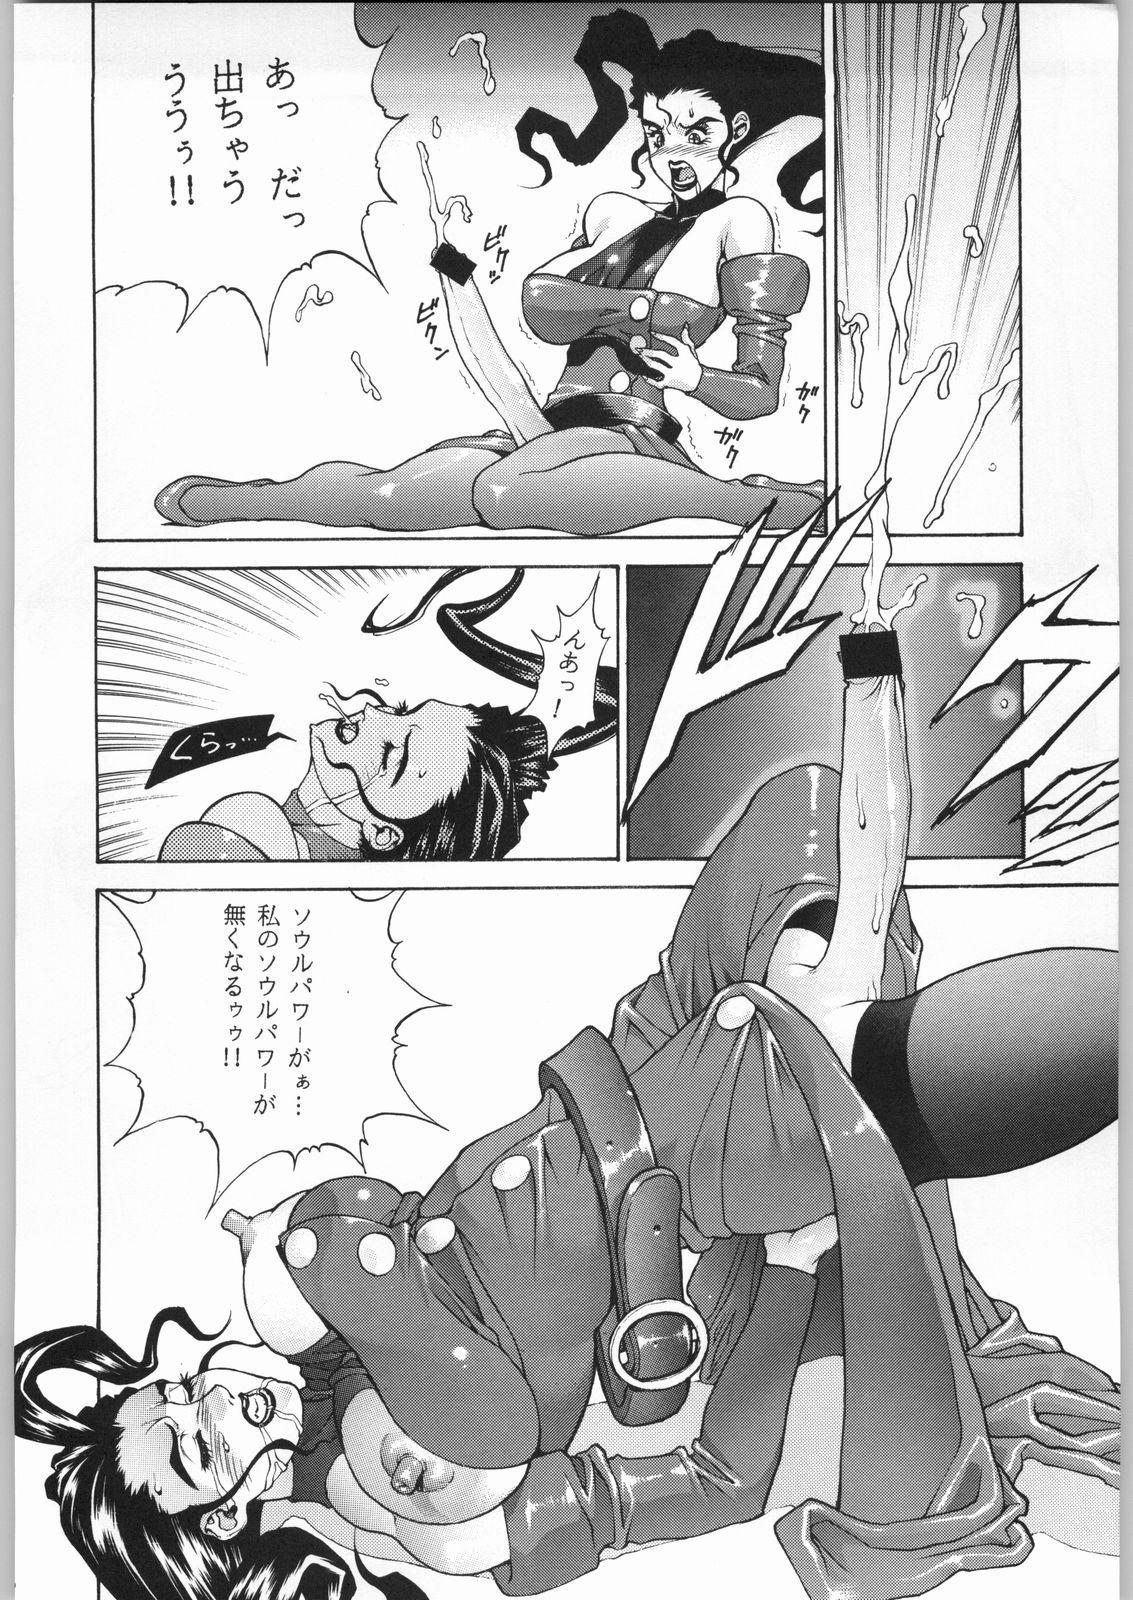 Ass To Mouth Close Up Gendai - Street fighter Tenchi muyo Ruin explorers Dominion tank police Newbie - Page 5